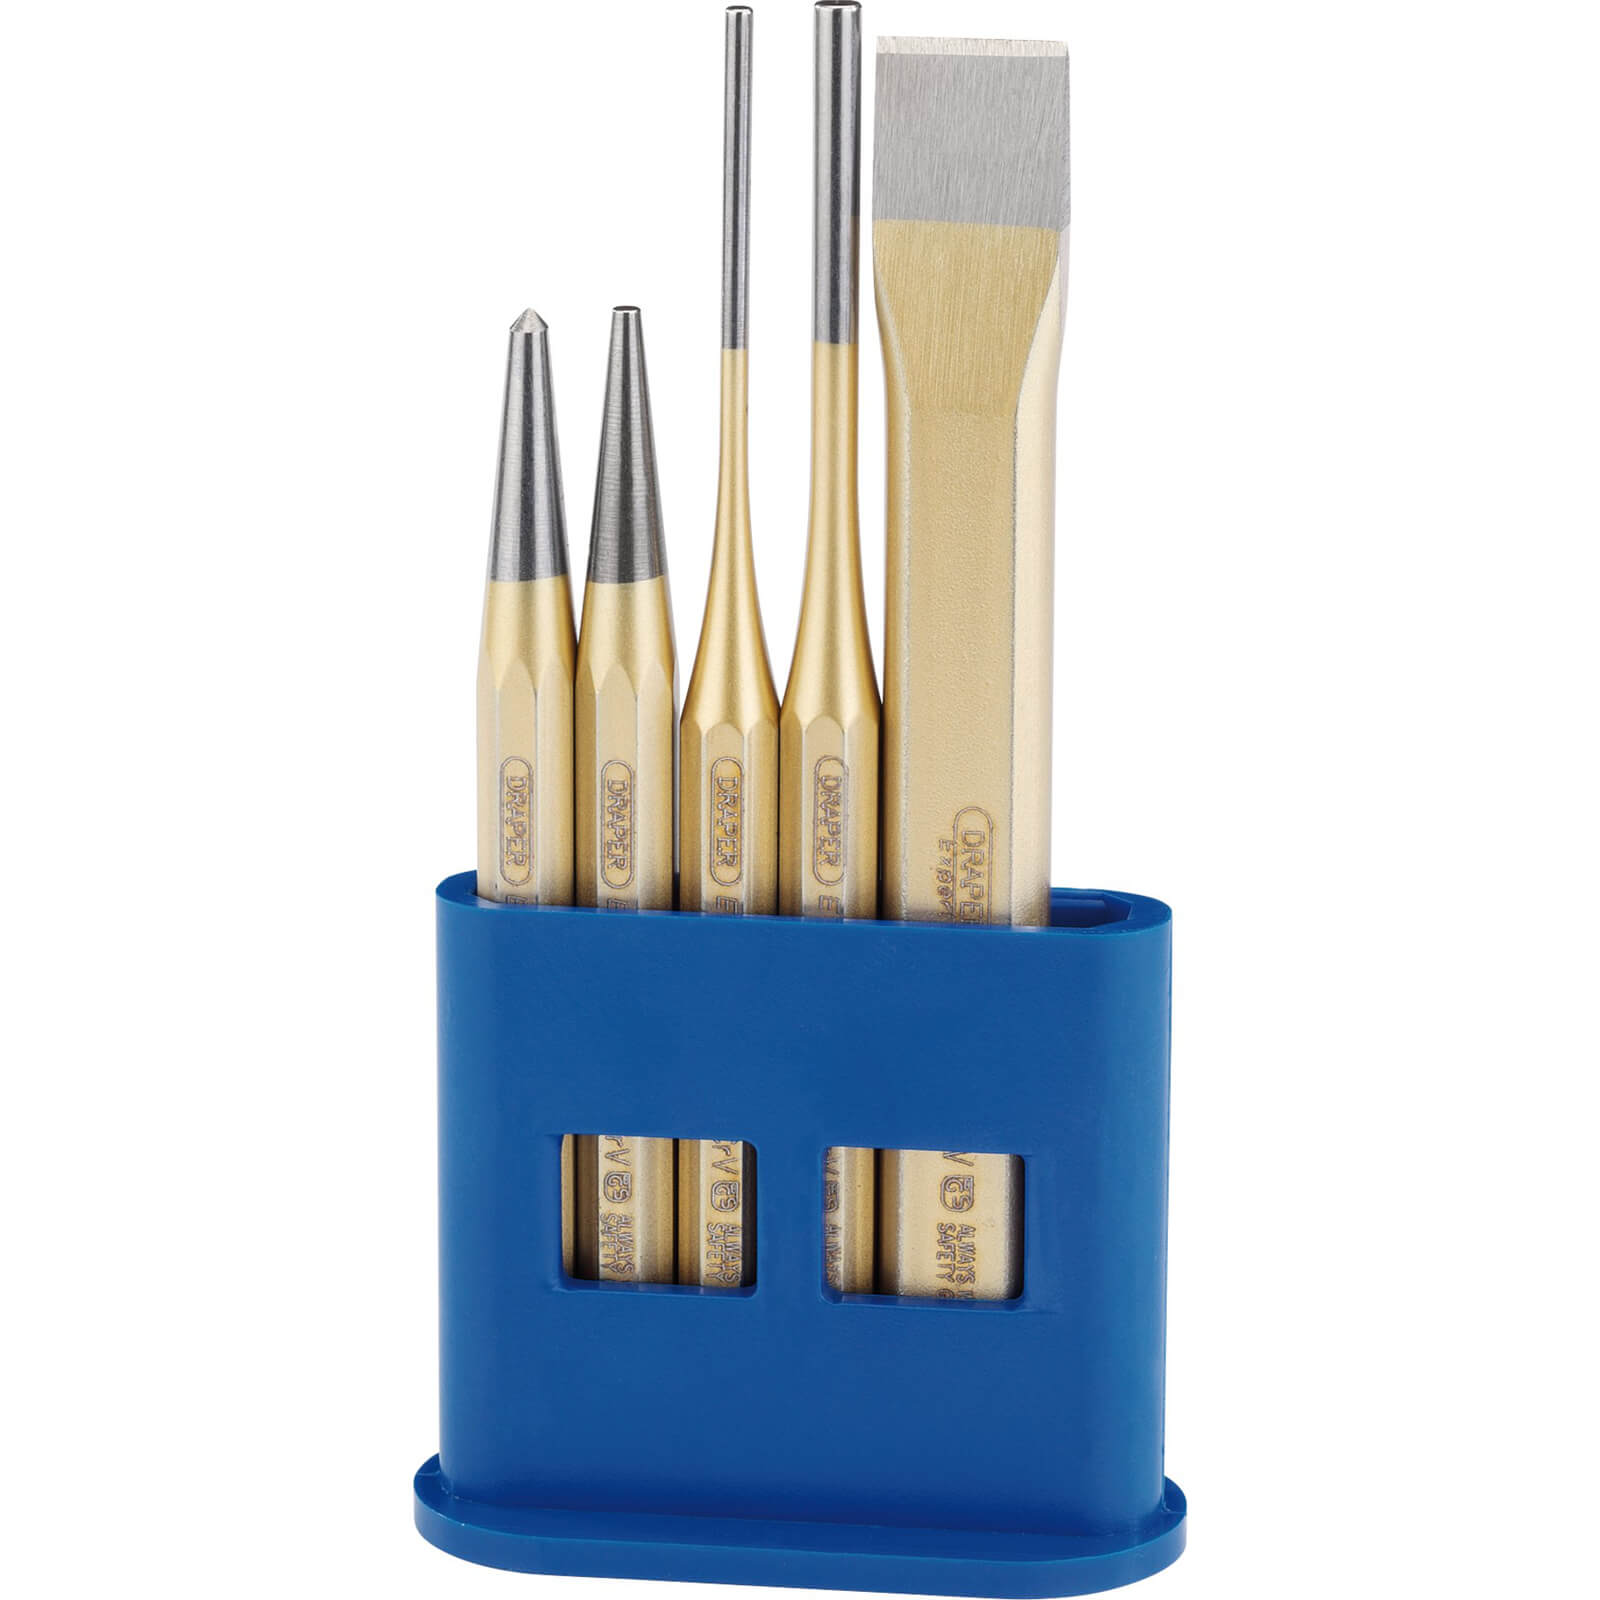 Image of Draper Expert 5 Piece Cold Chisel and Punch Set